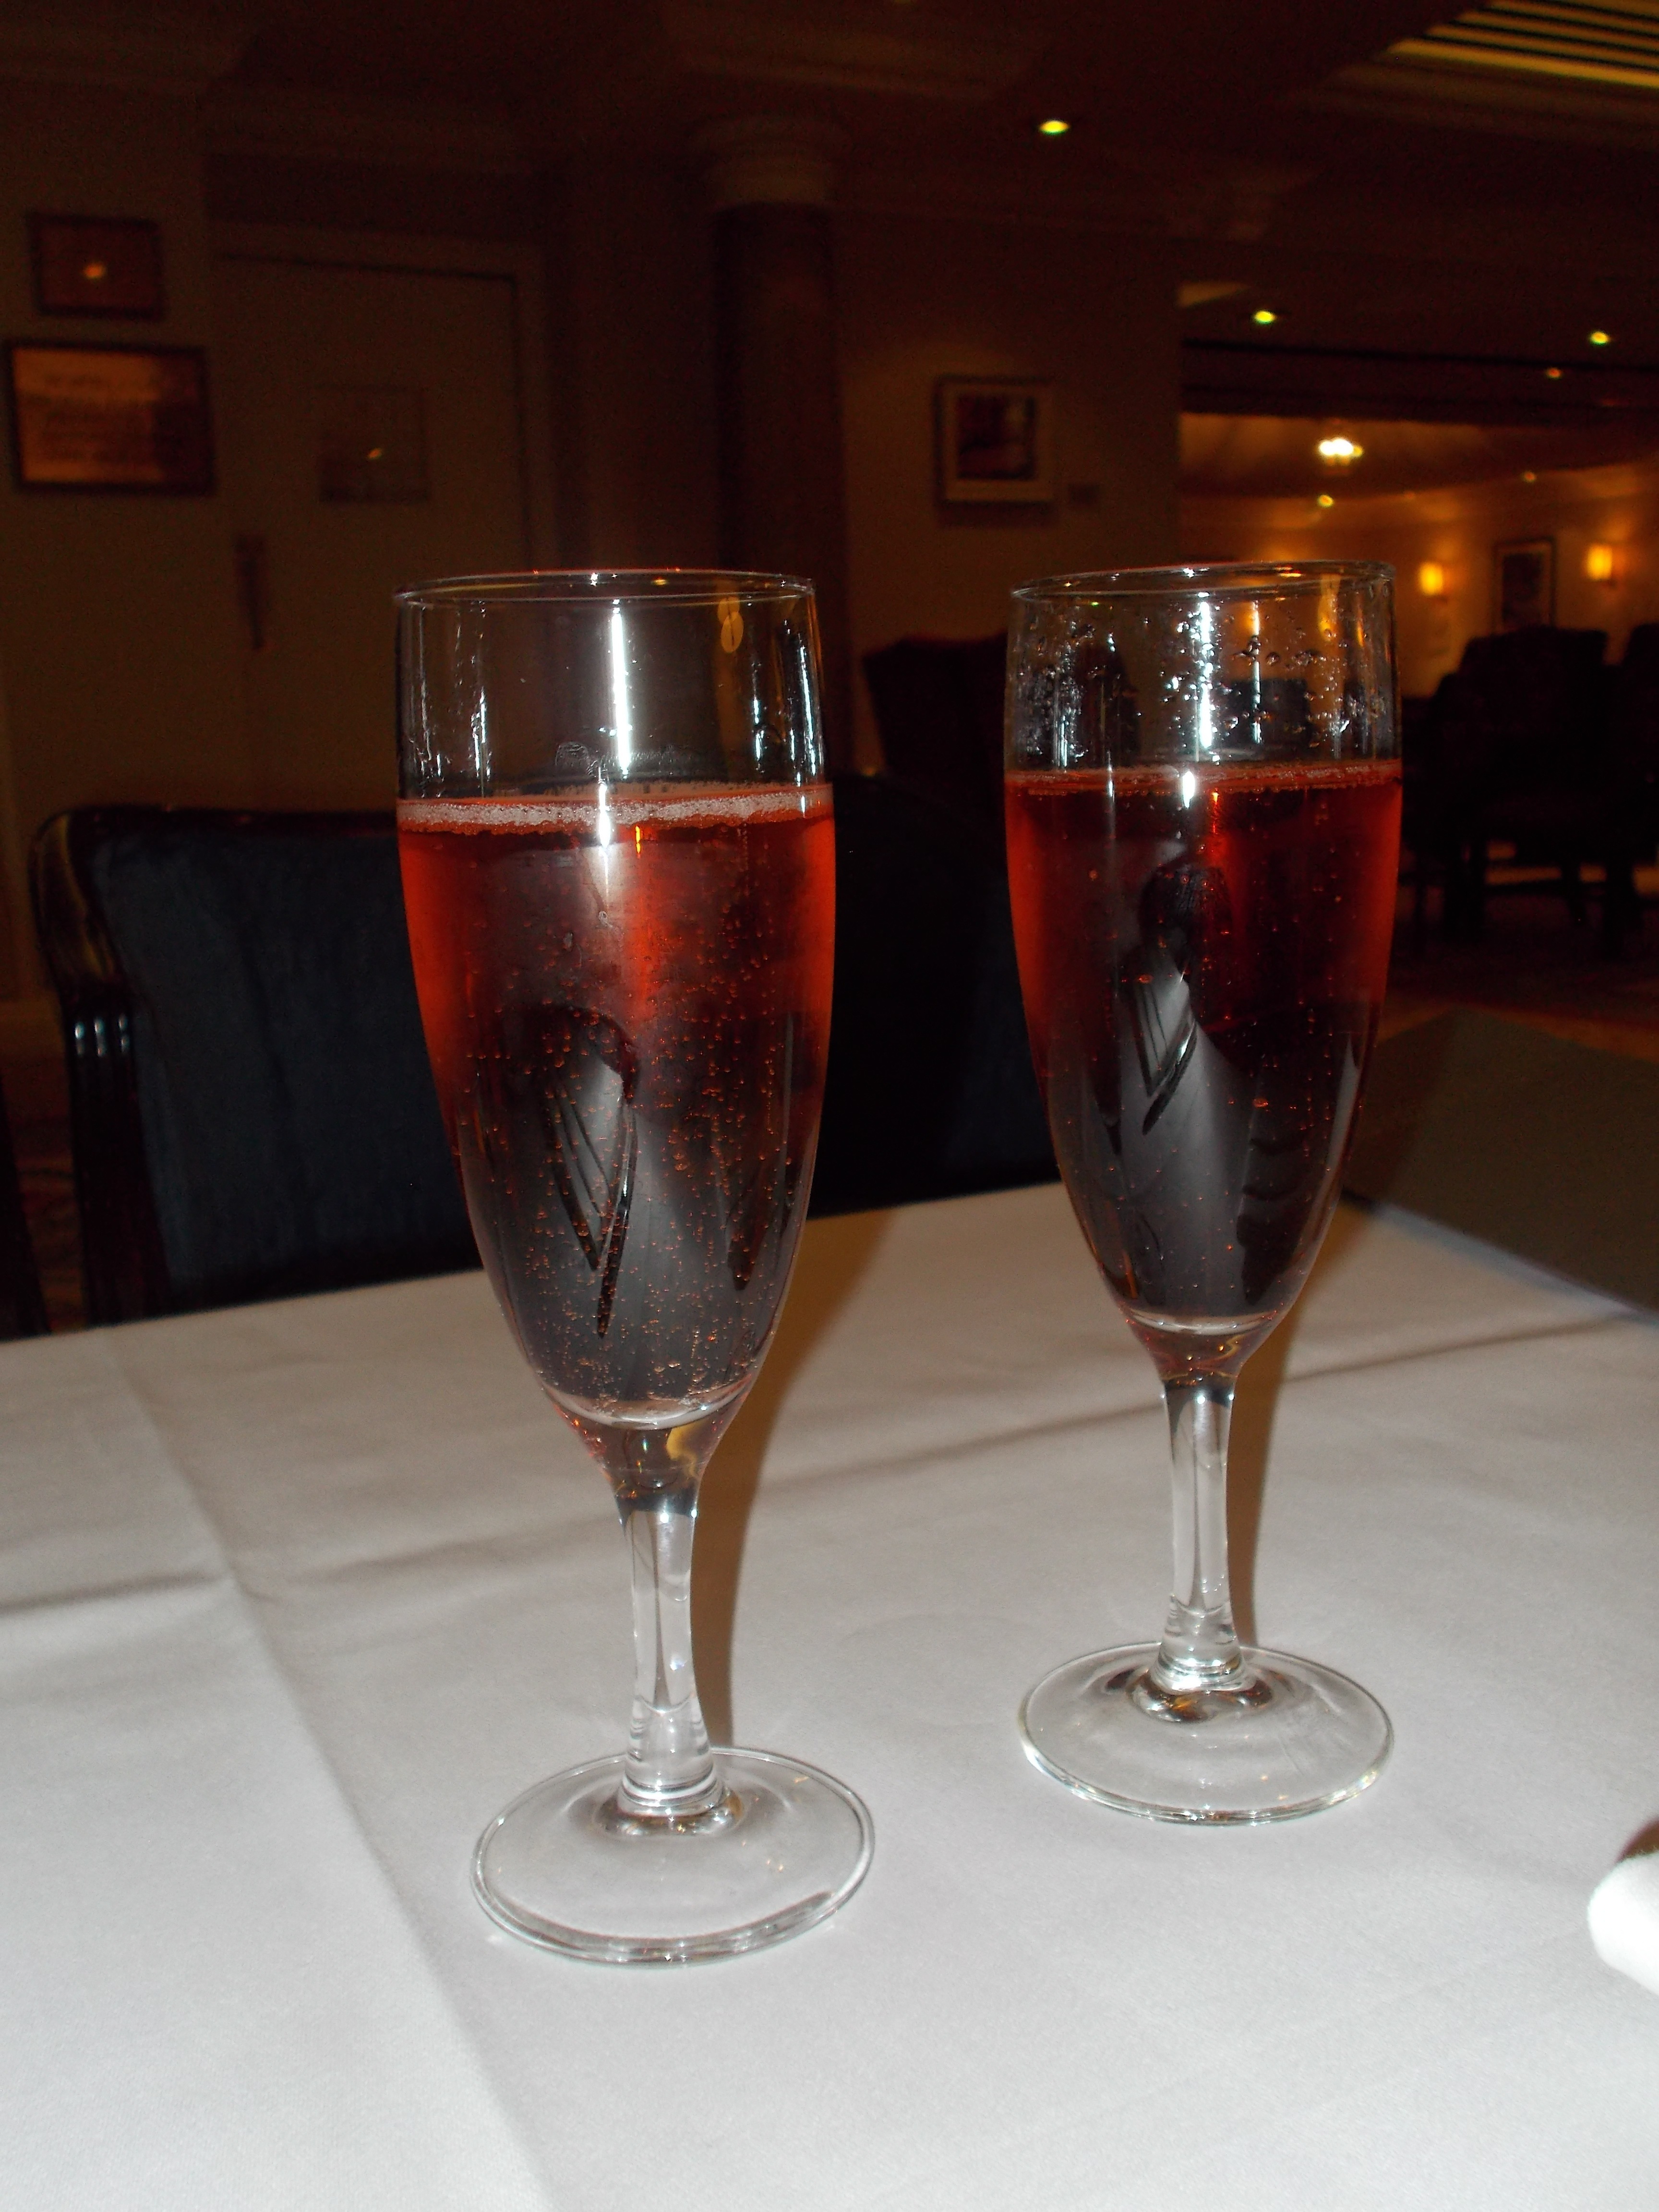 Laurent-Perrier Rose for two Afternoon Tea Lancaster London Hotel